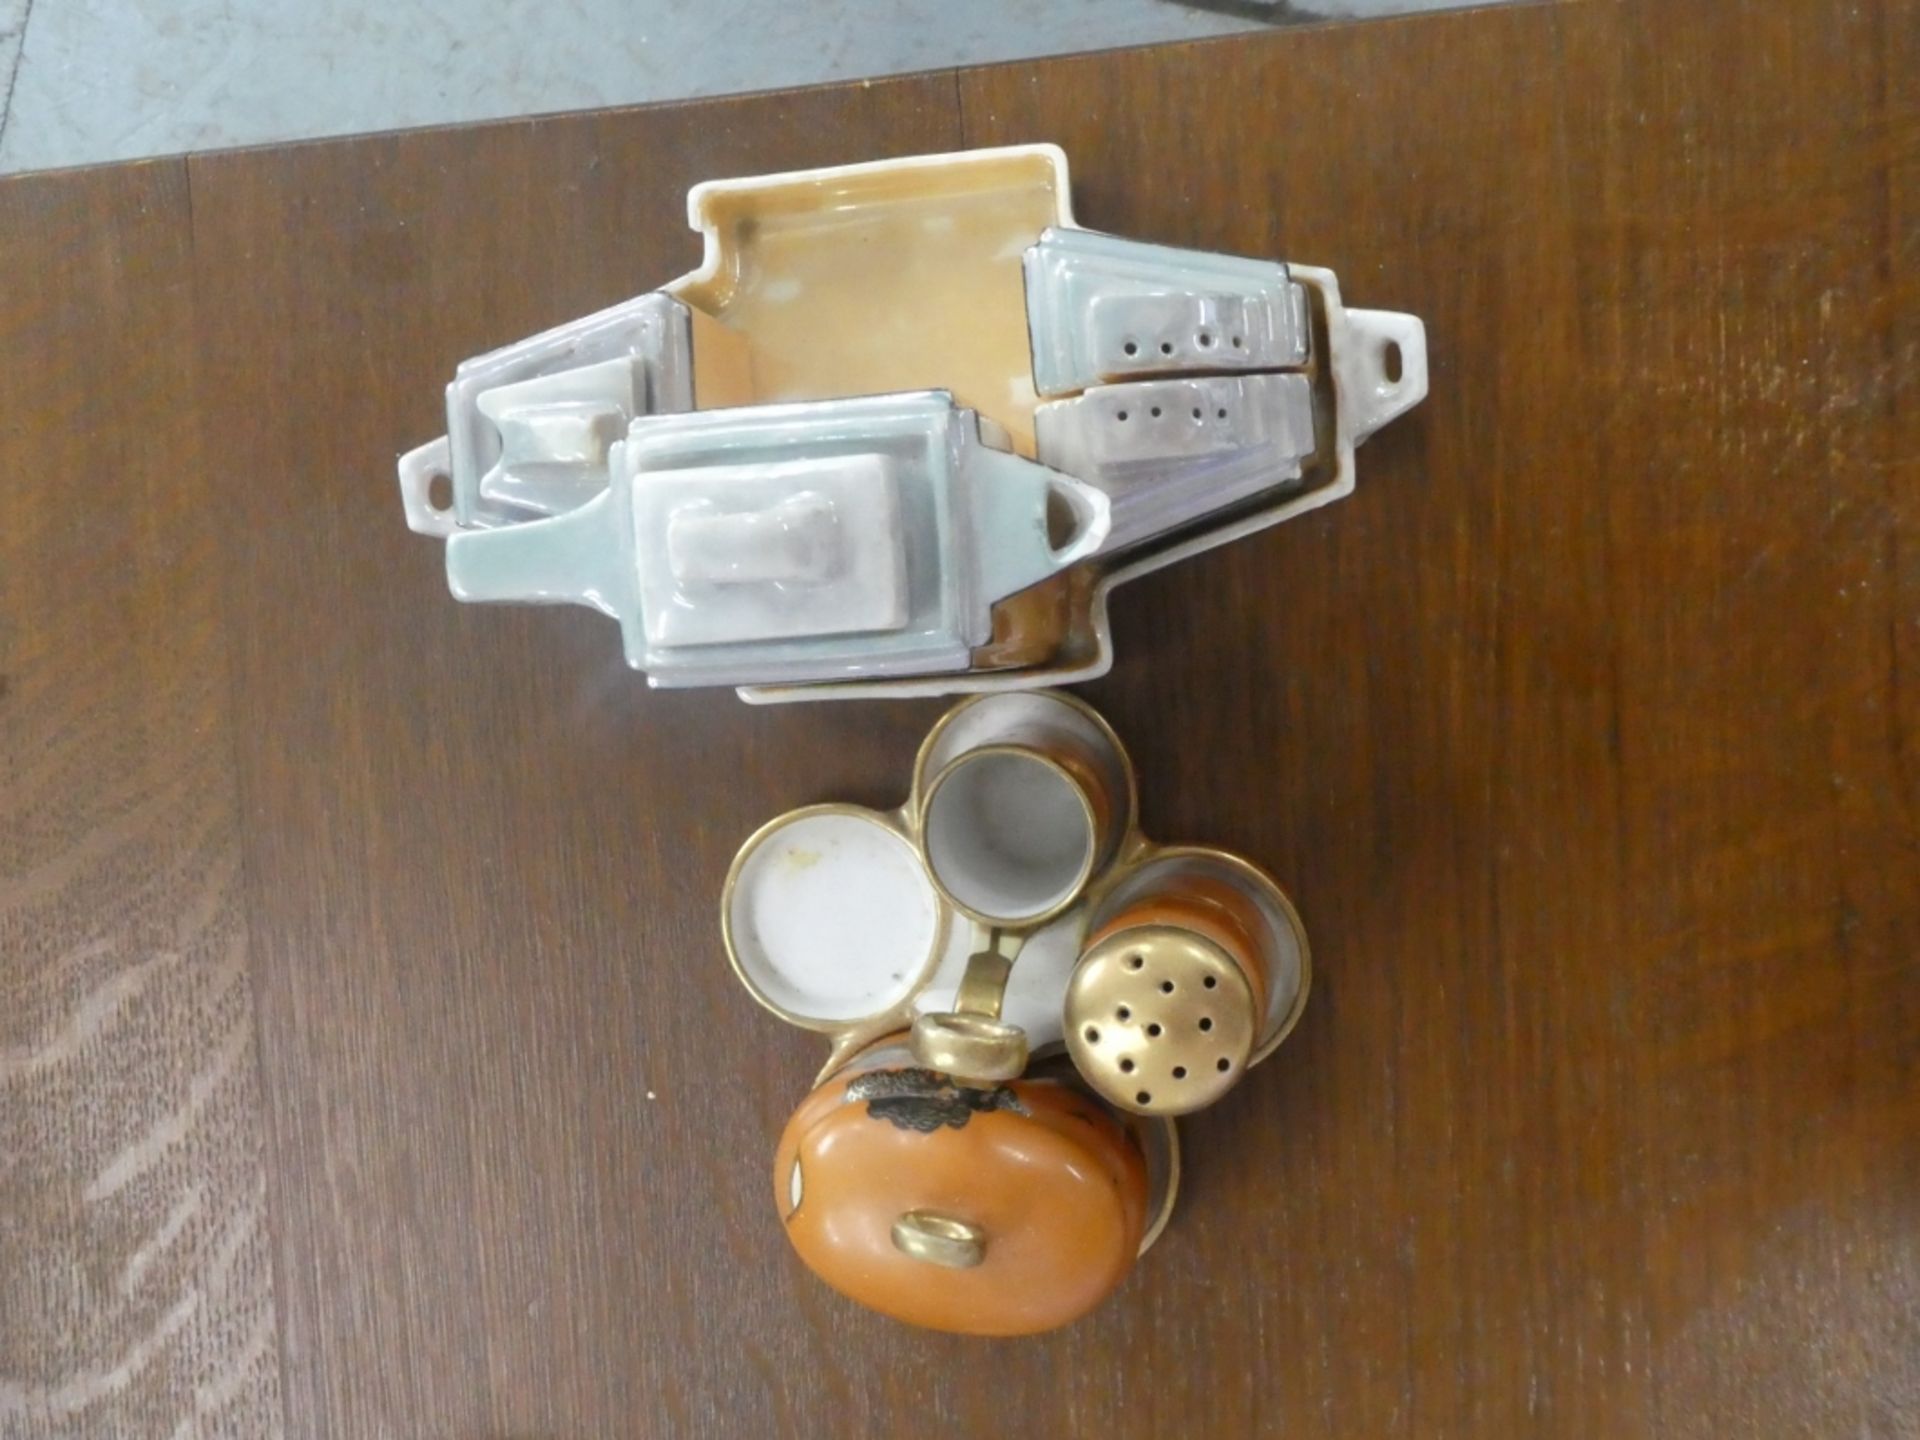 2 TABLE CONDIMENT SETS (BOTH MISSING A PART) - Image 2 of 2